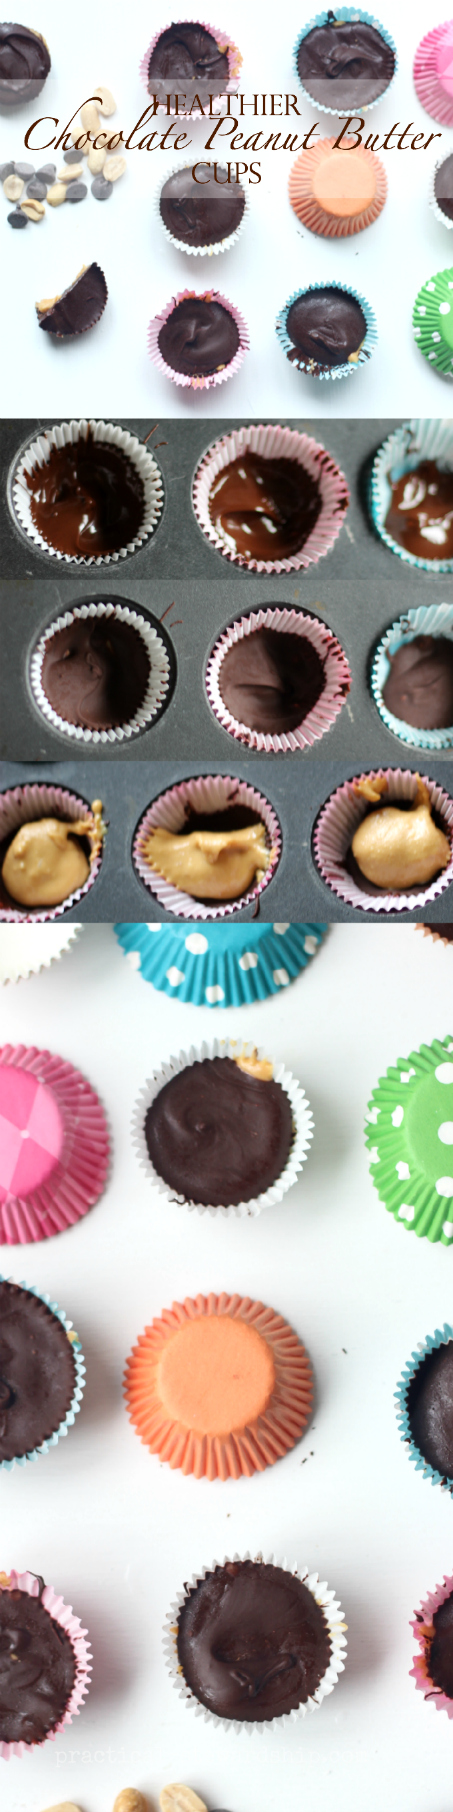 Healthier Chocolate Peanut Butter  Cups